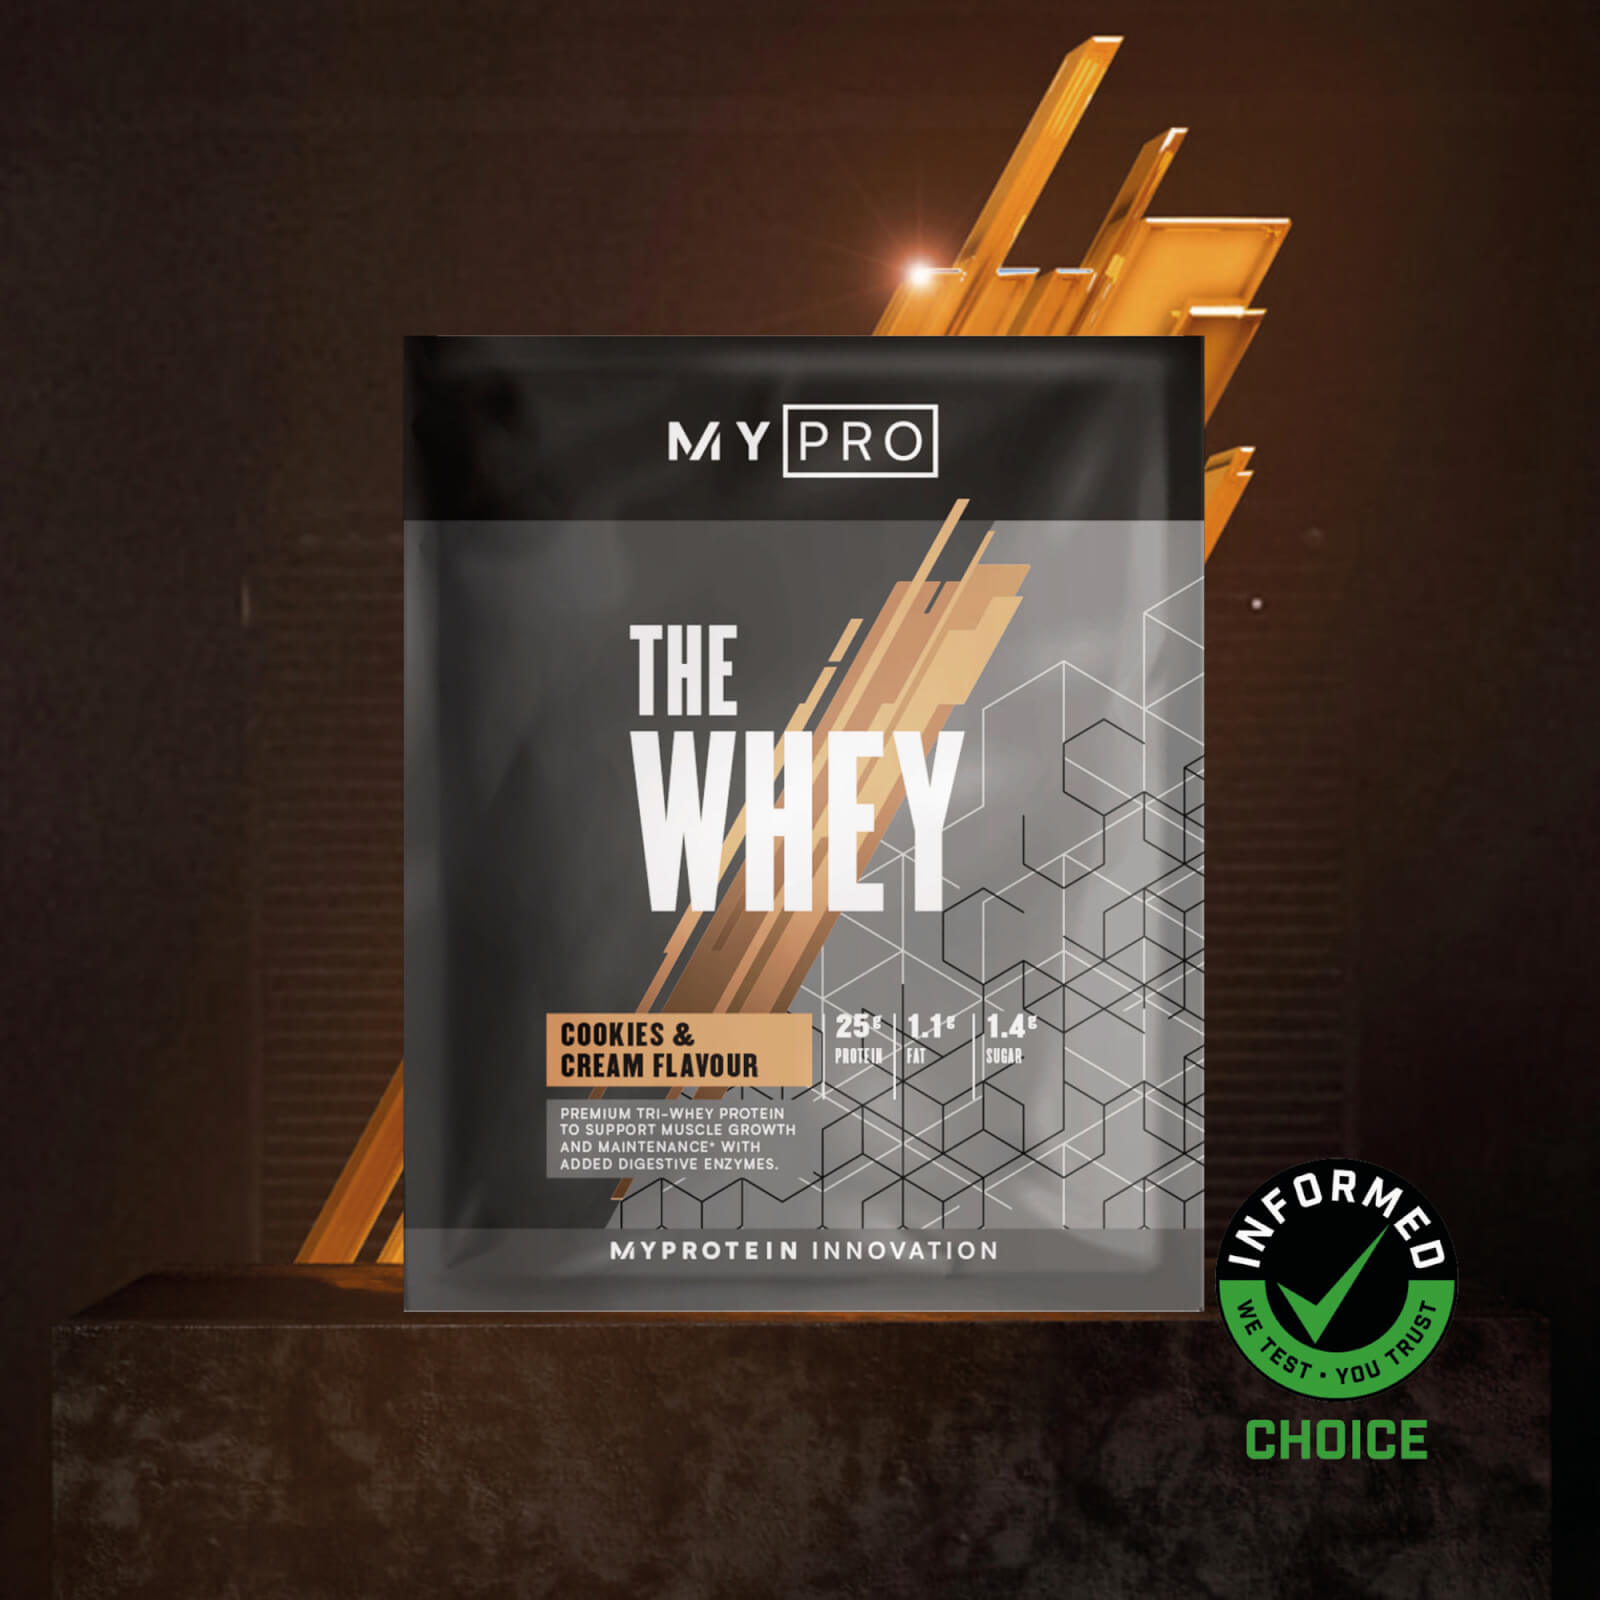 Myprotein THE Whey V2 (Sample) - 30g - Cookies et crème